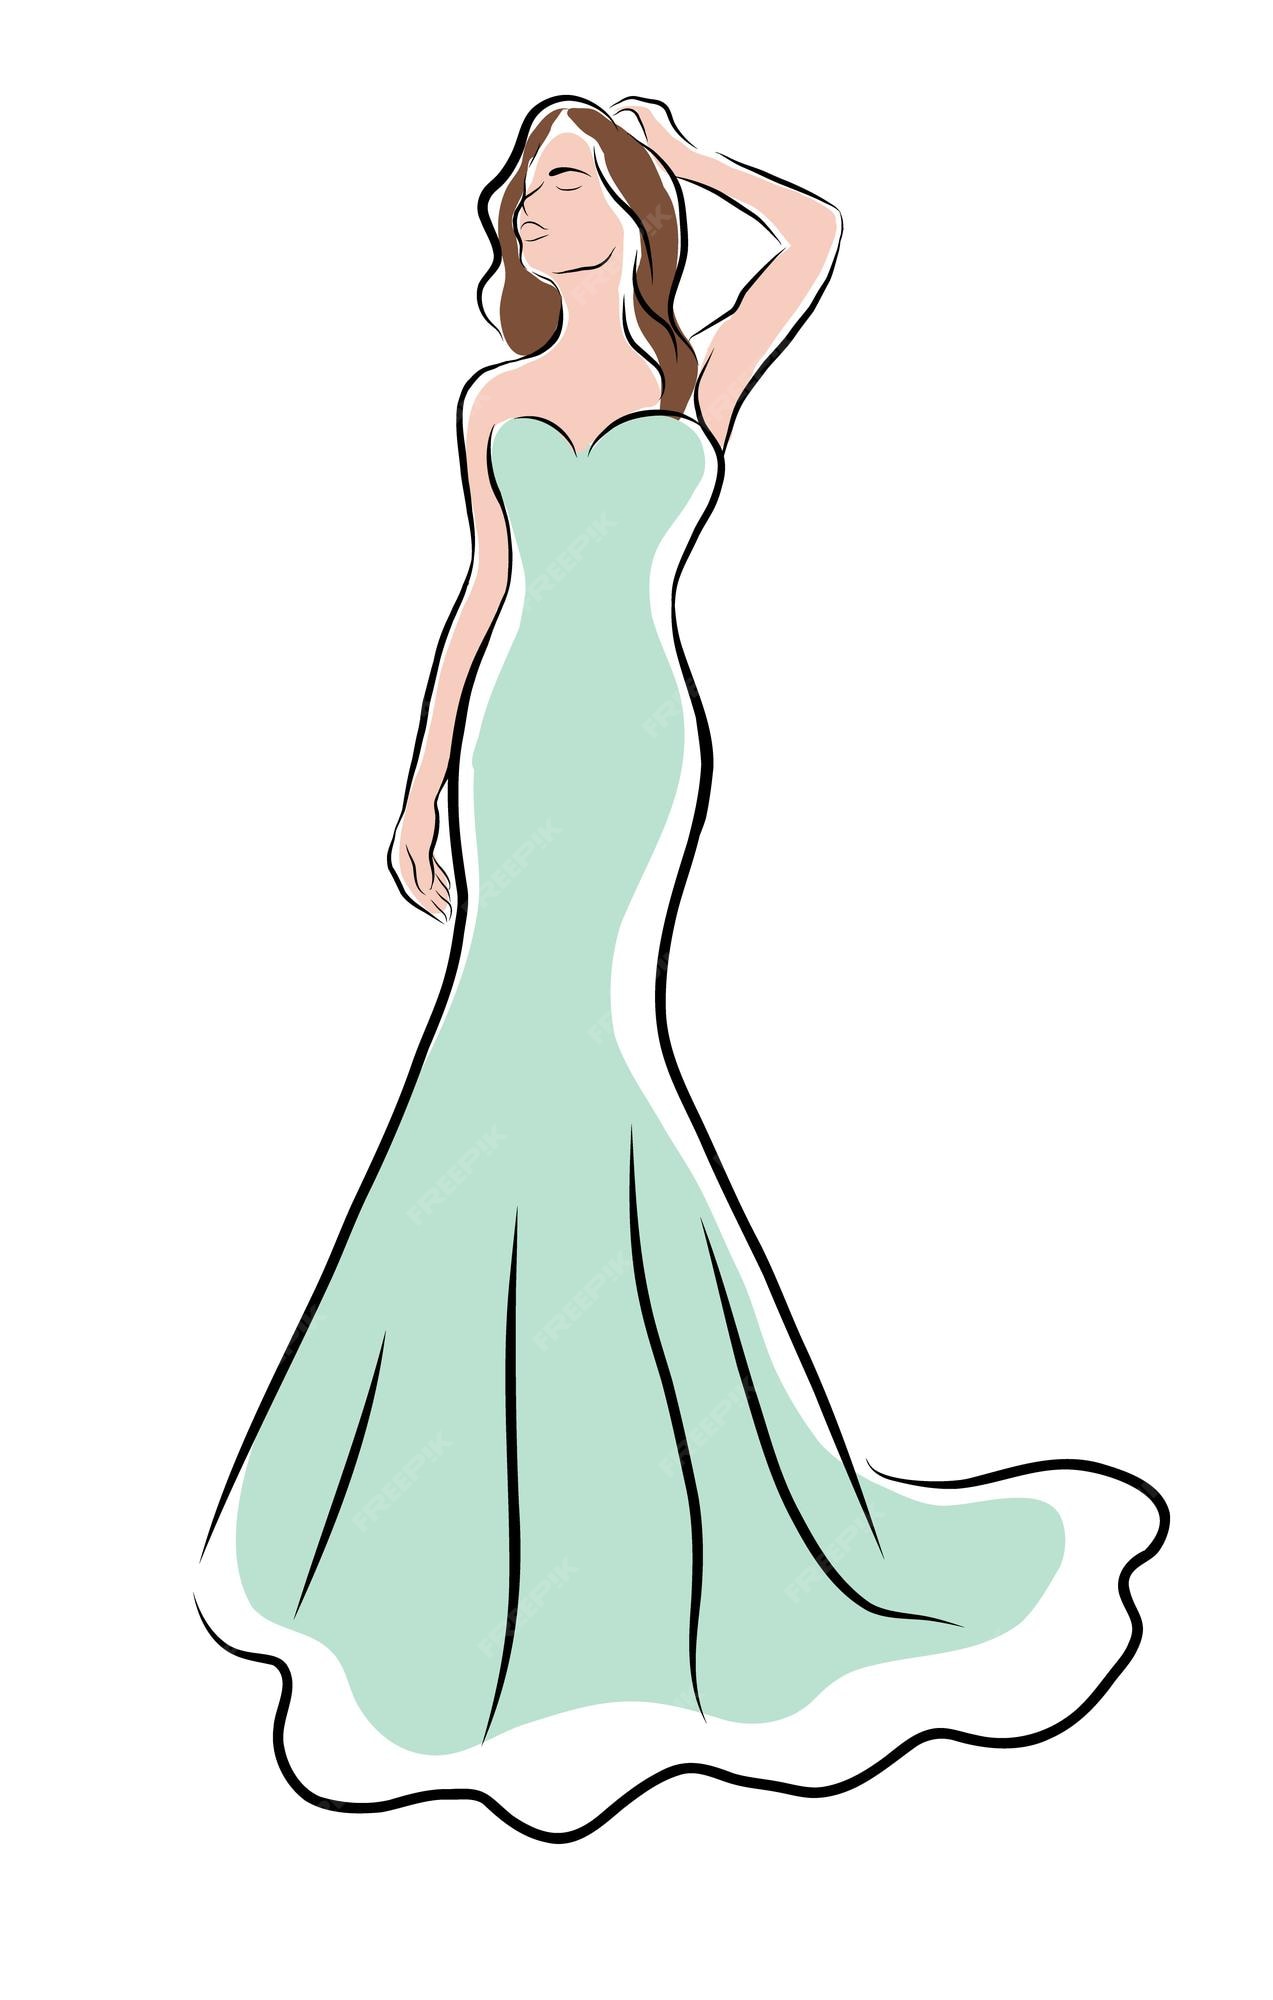 Premium Vector | A girl in a long mint-colored dress sketch. fashion   drawn vector illustration isolated on a white background